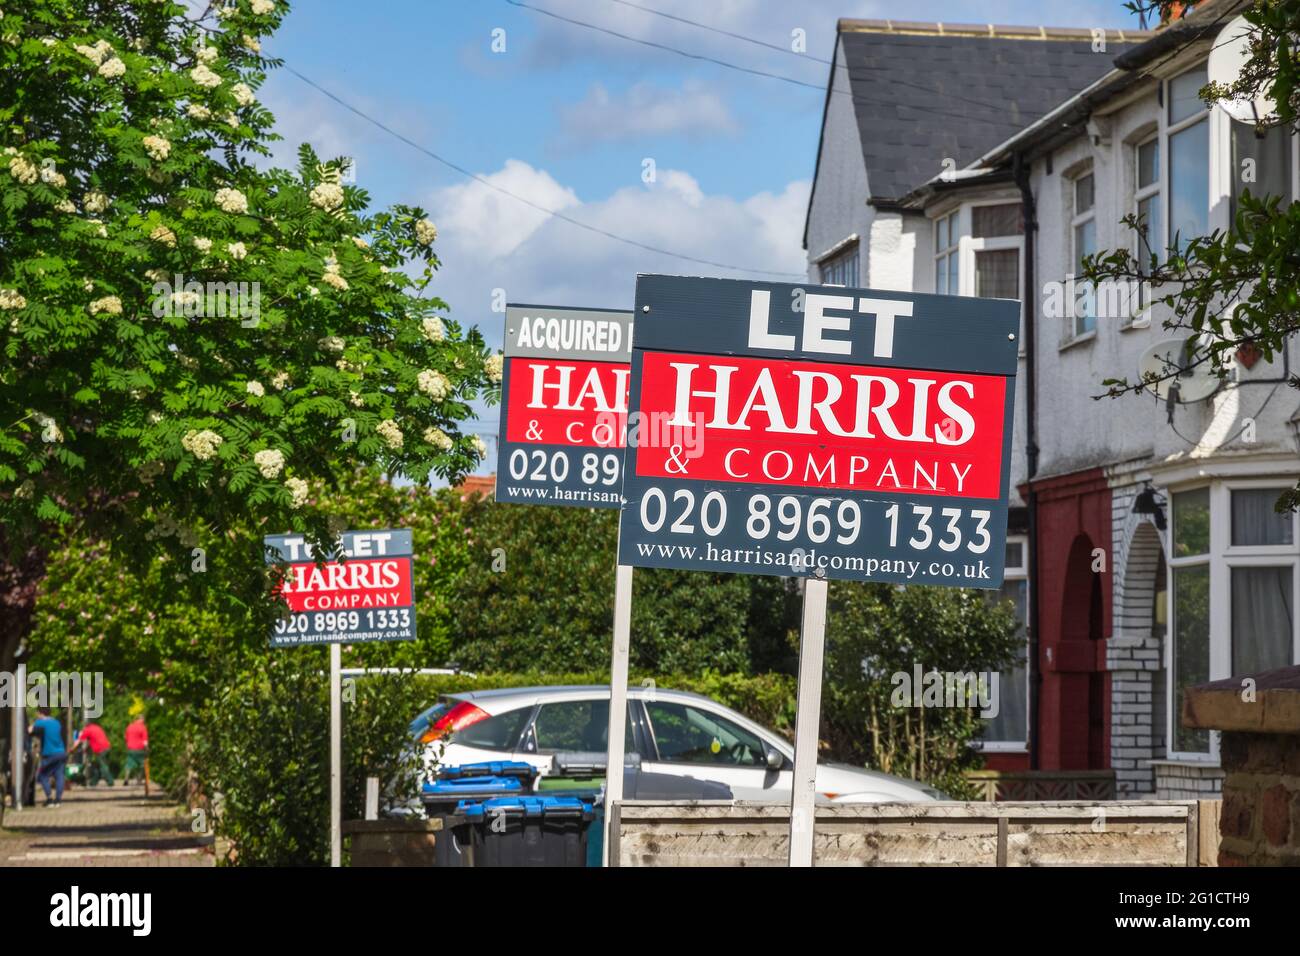 London, UK - 10 May, 2021 - Estate agent signs advertising home for rent or sale around Kensal Rise Stock Photo